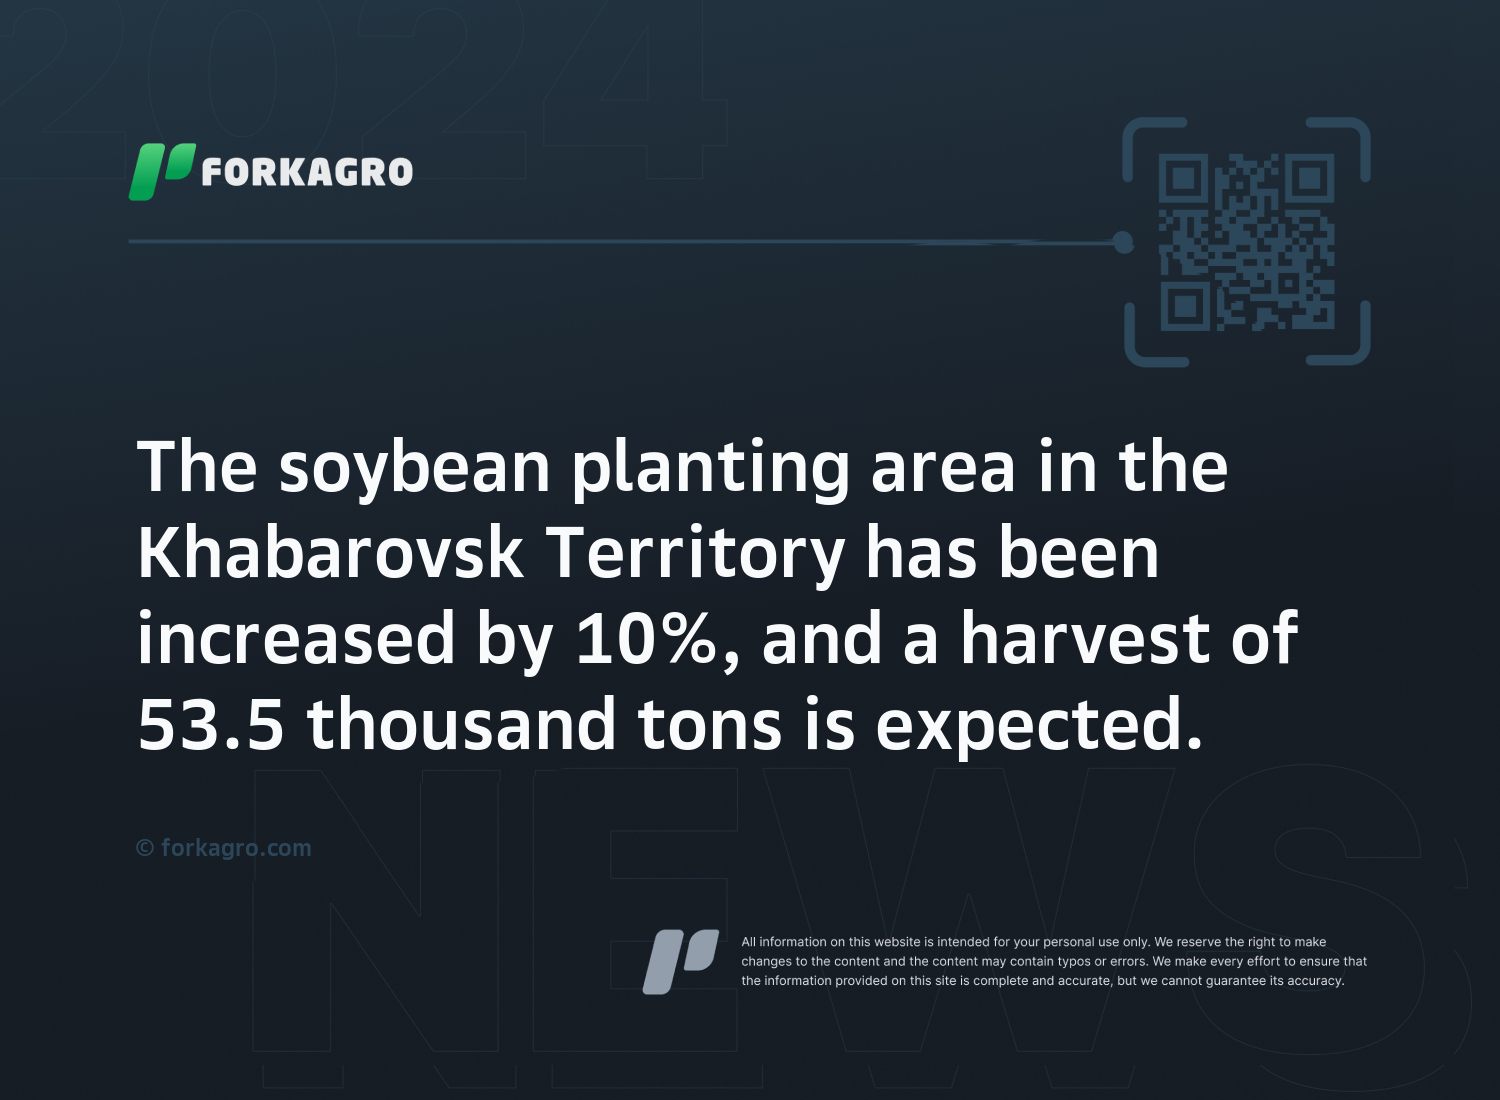 The soybean planting area in the Khabarovsk Territory has been increased by 10%, and a harvest of 53.5 thousand tons is expected.